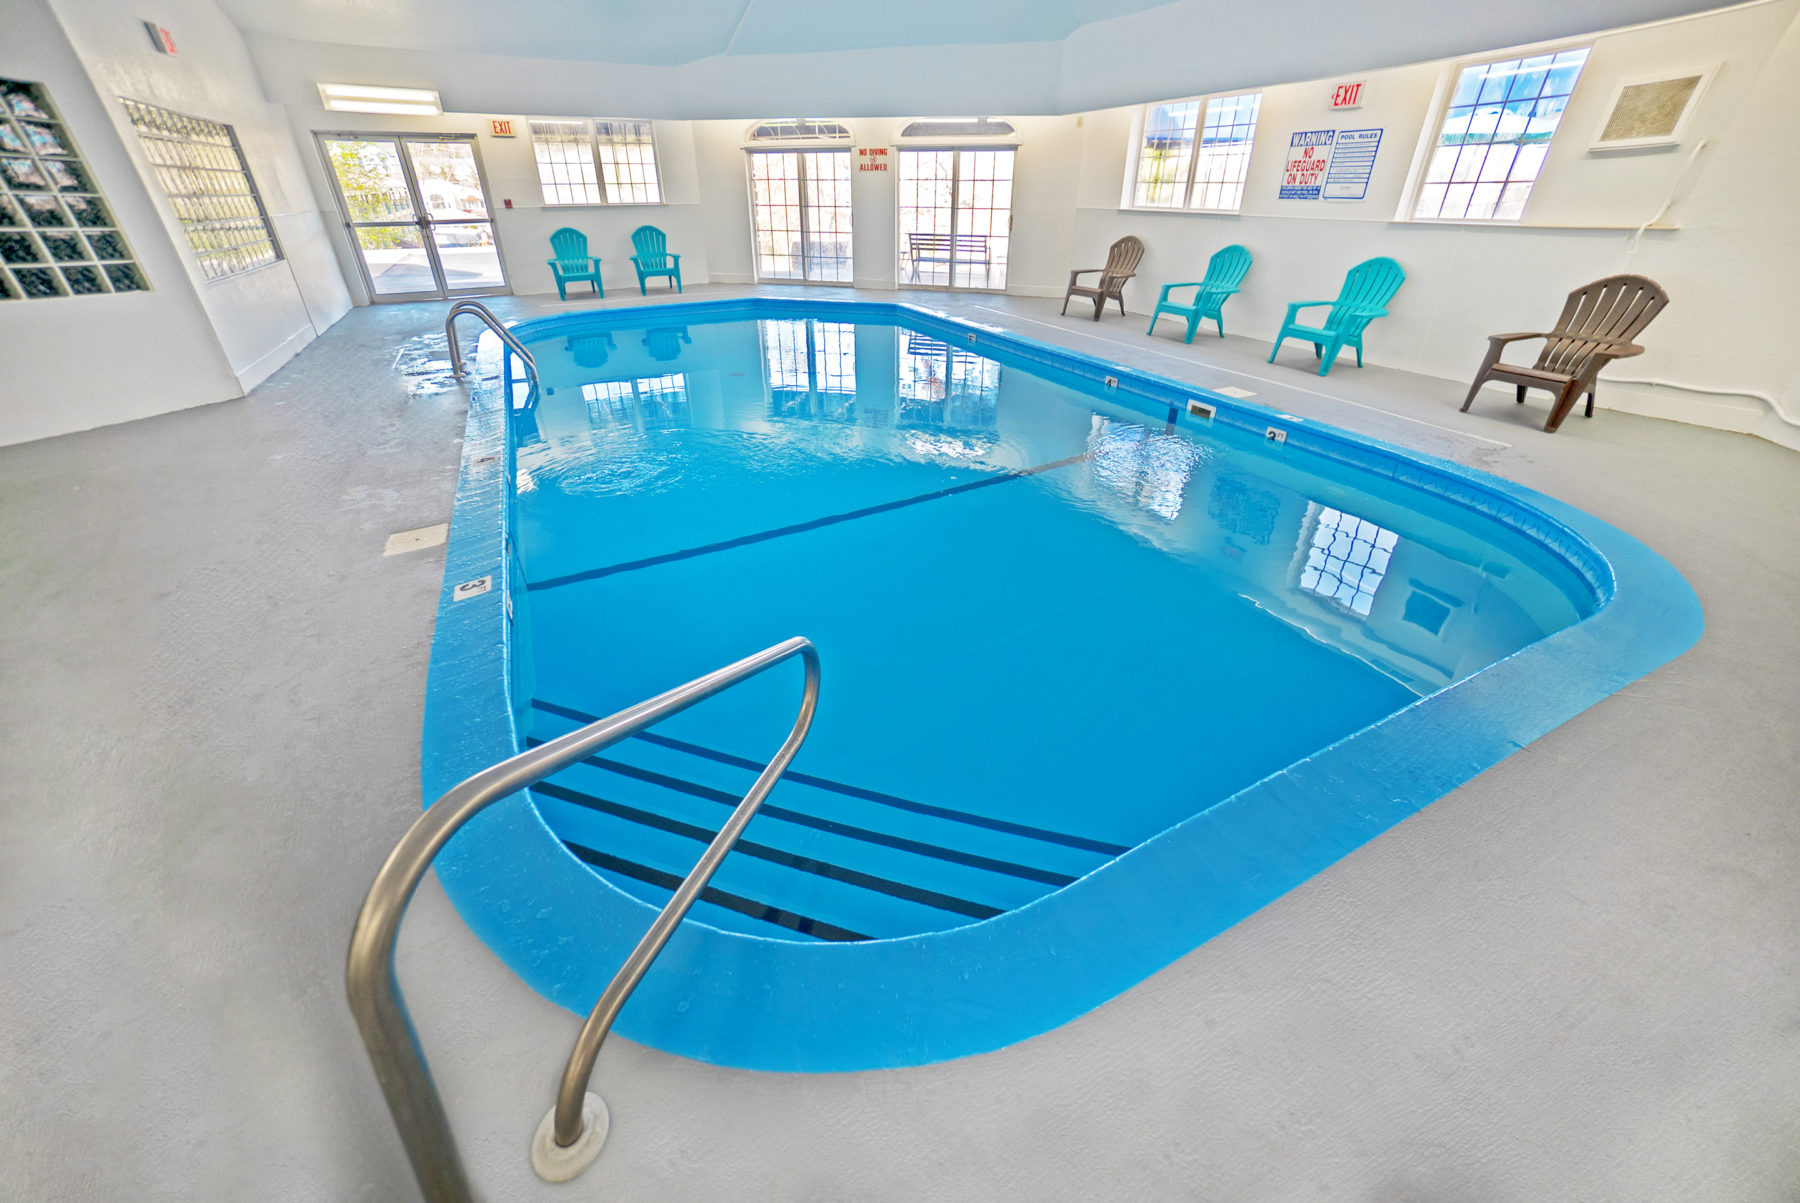 The Stone Castle Hotel and Conference Center, Branson MO hotels, Branson hotels with indoor pool